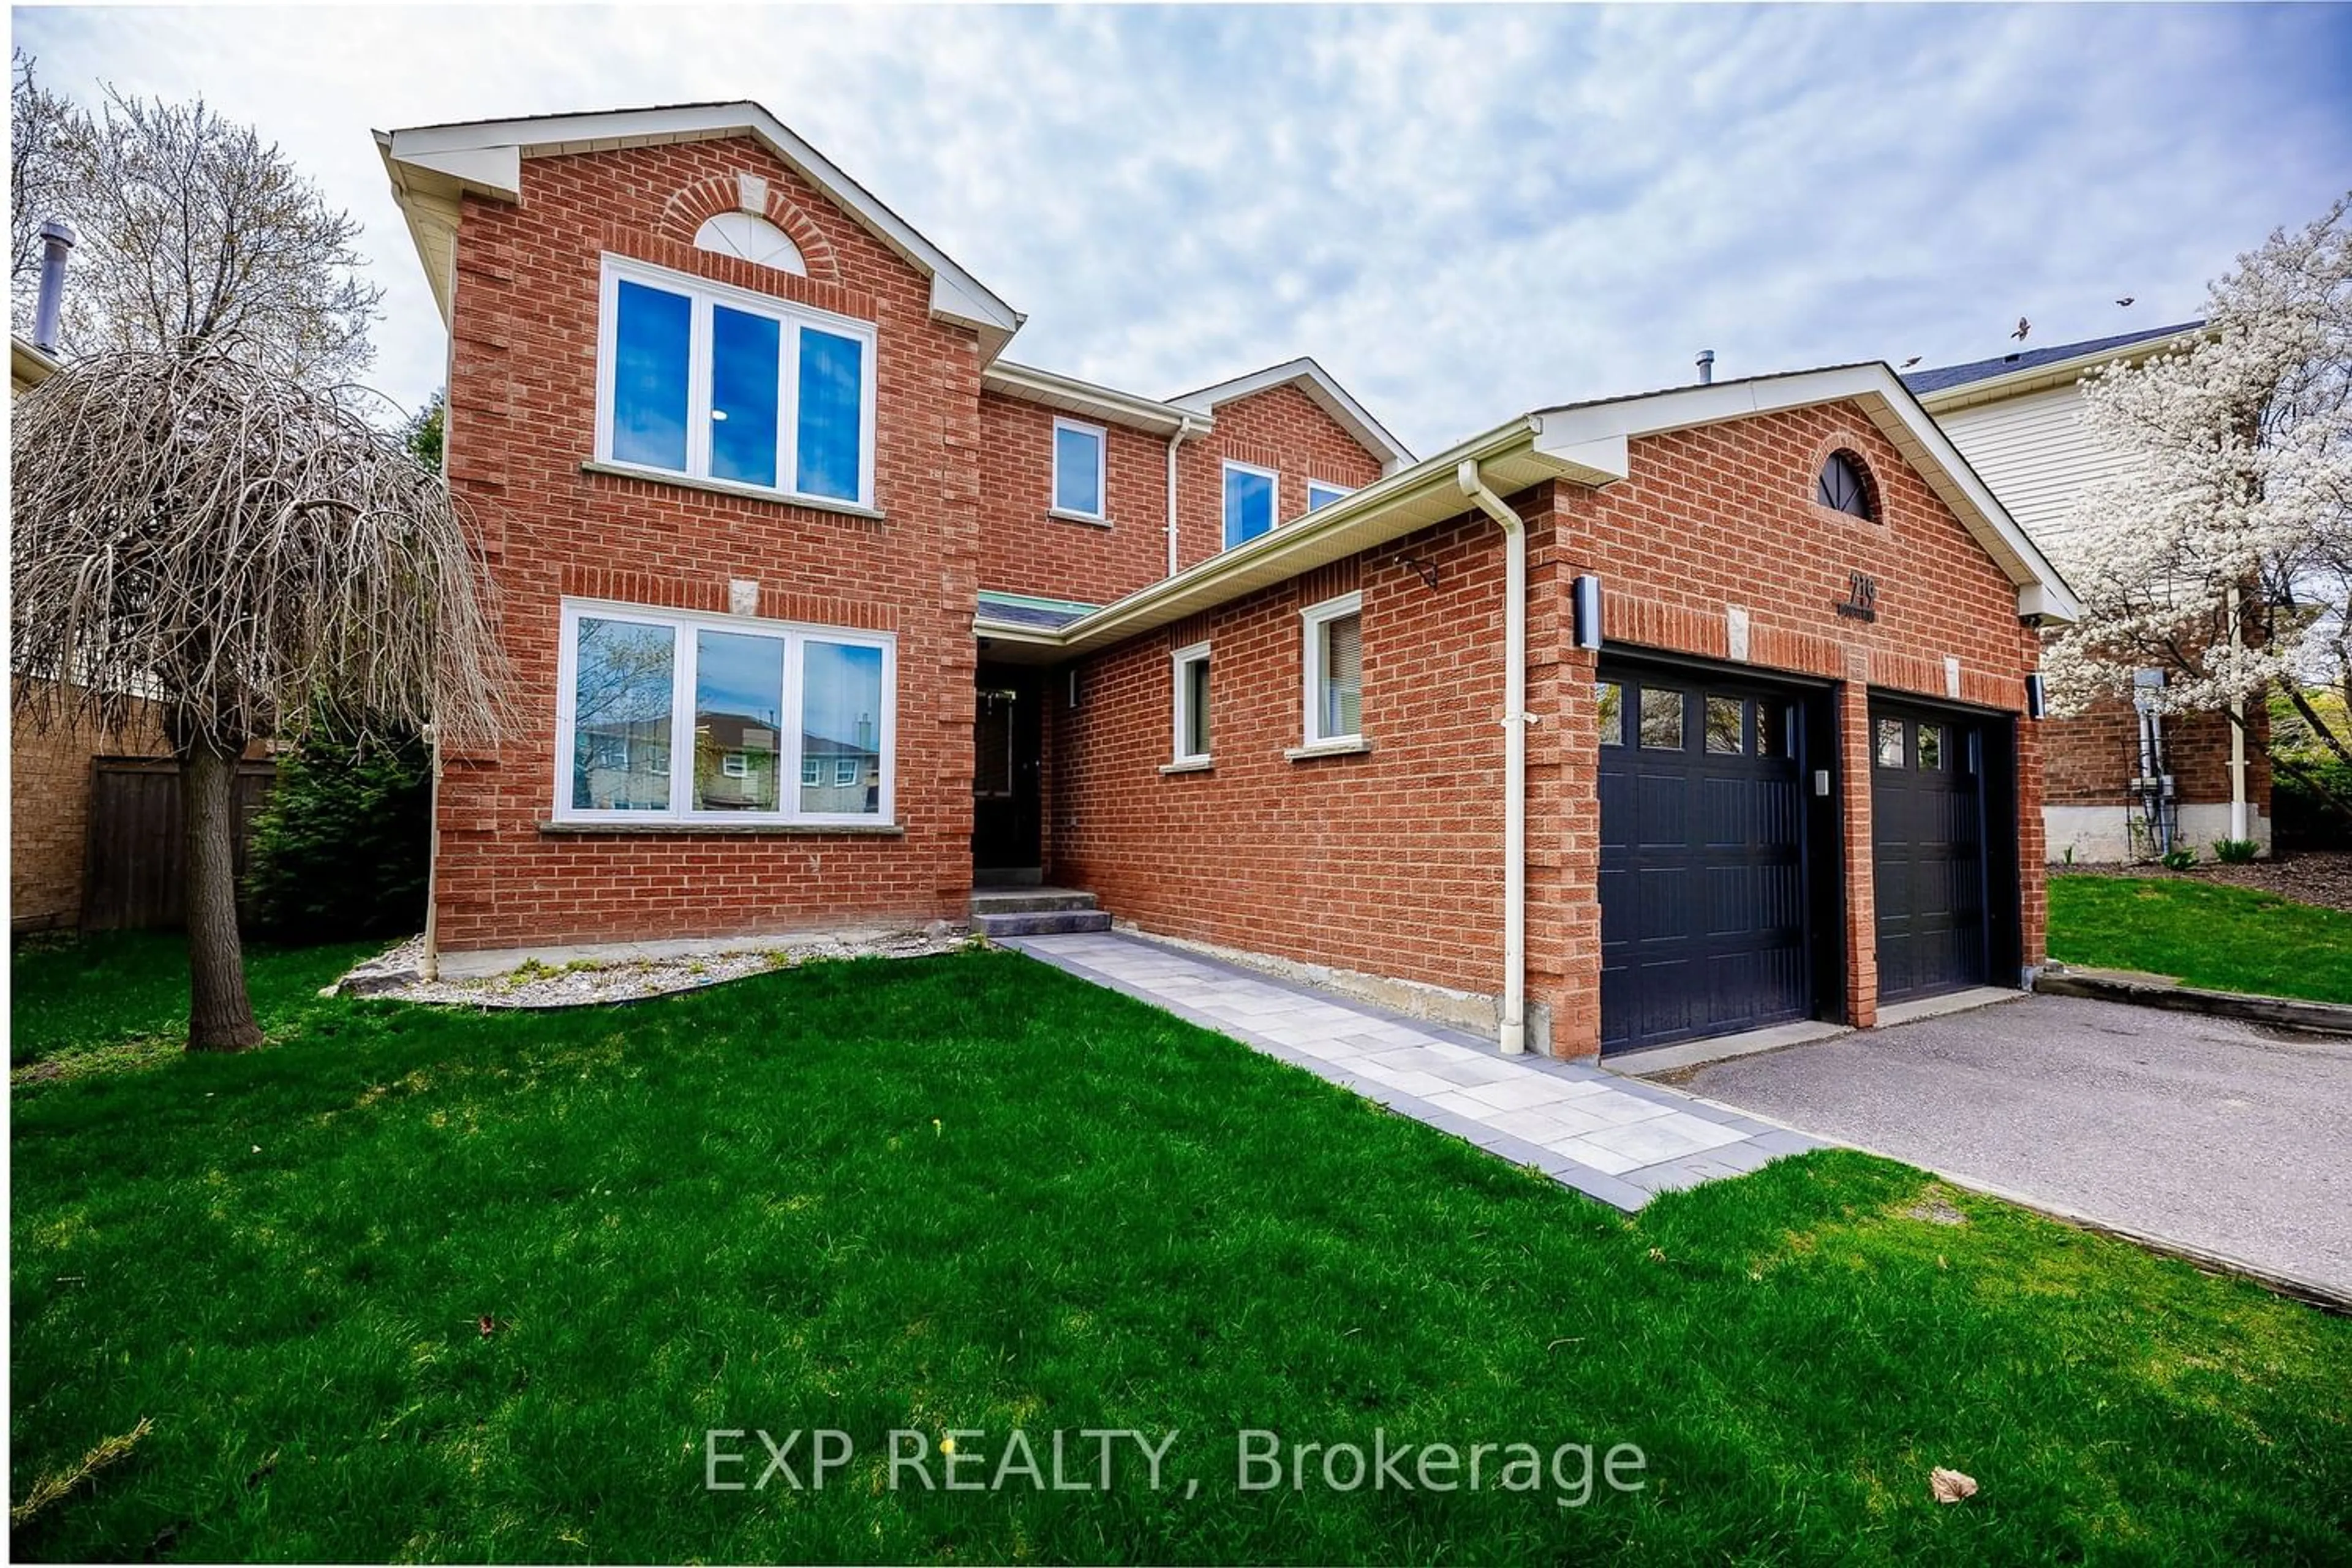 Home with brick exterior material for 219 Bassett Blvd, Whitby Ontario L1R 1S4